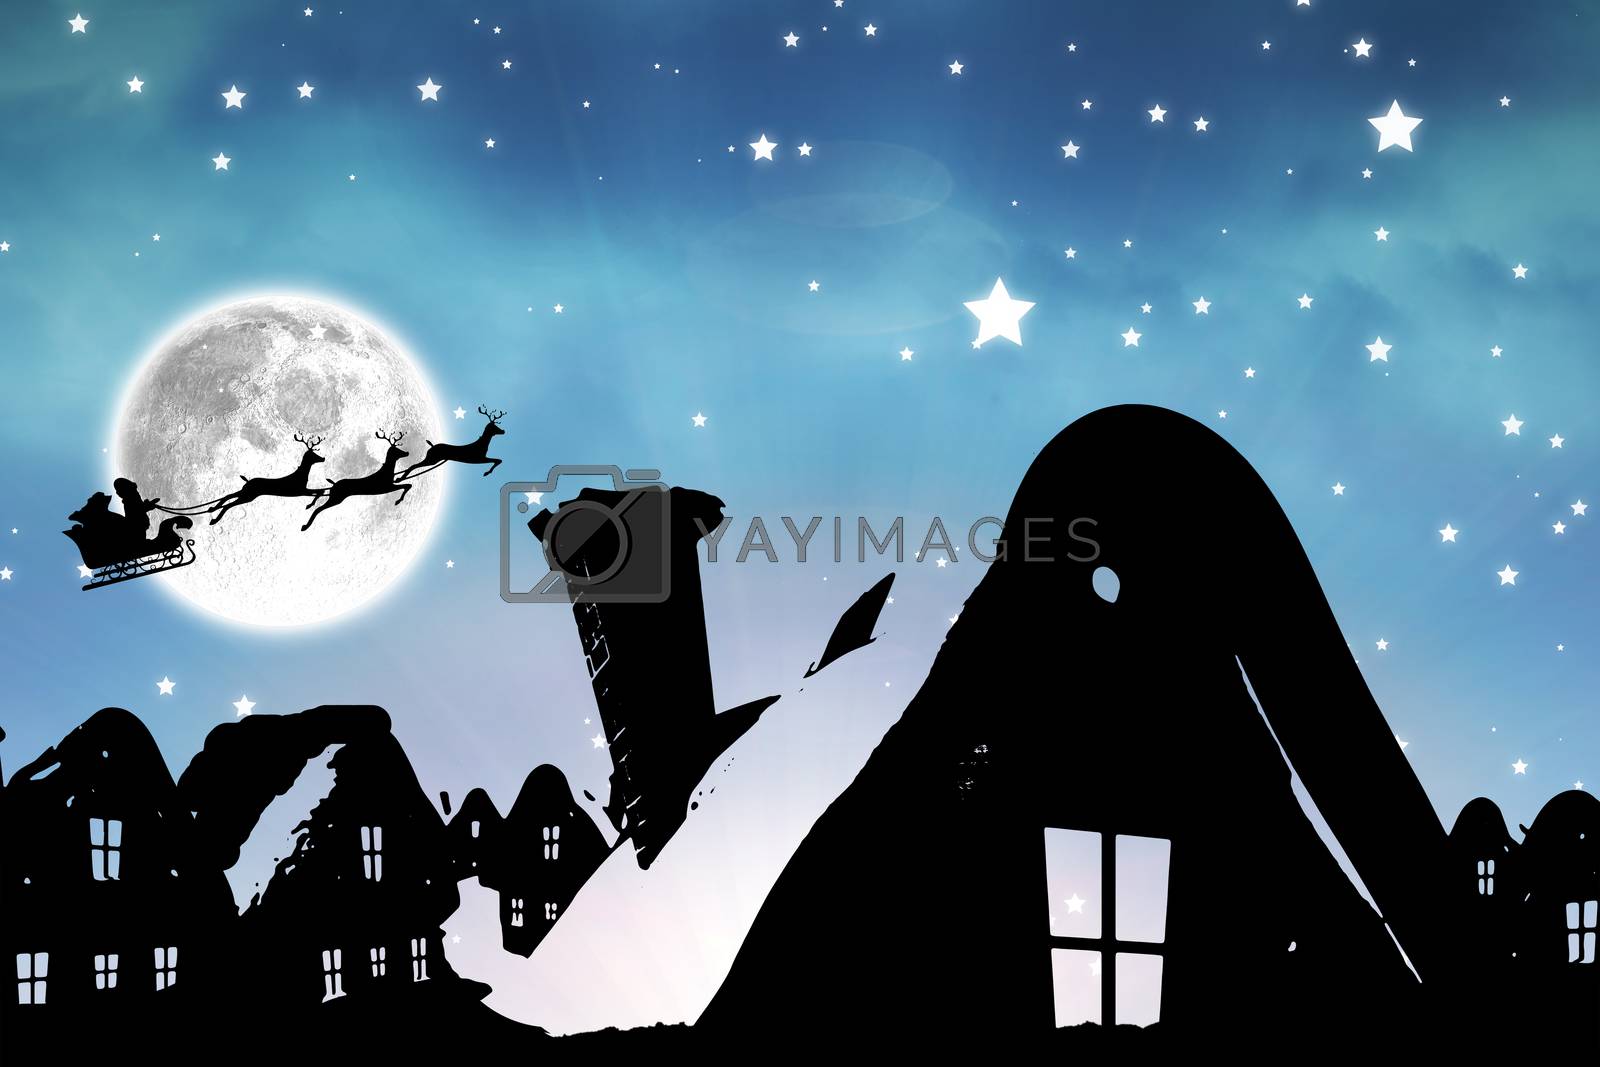 Royalty free image of Composite image of christmas scene silhouette by Wavebreakmedia